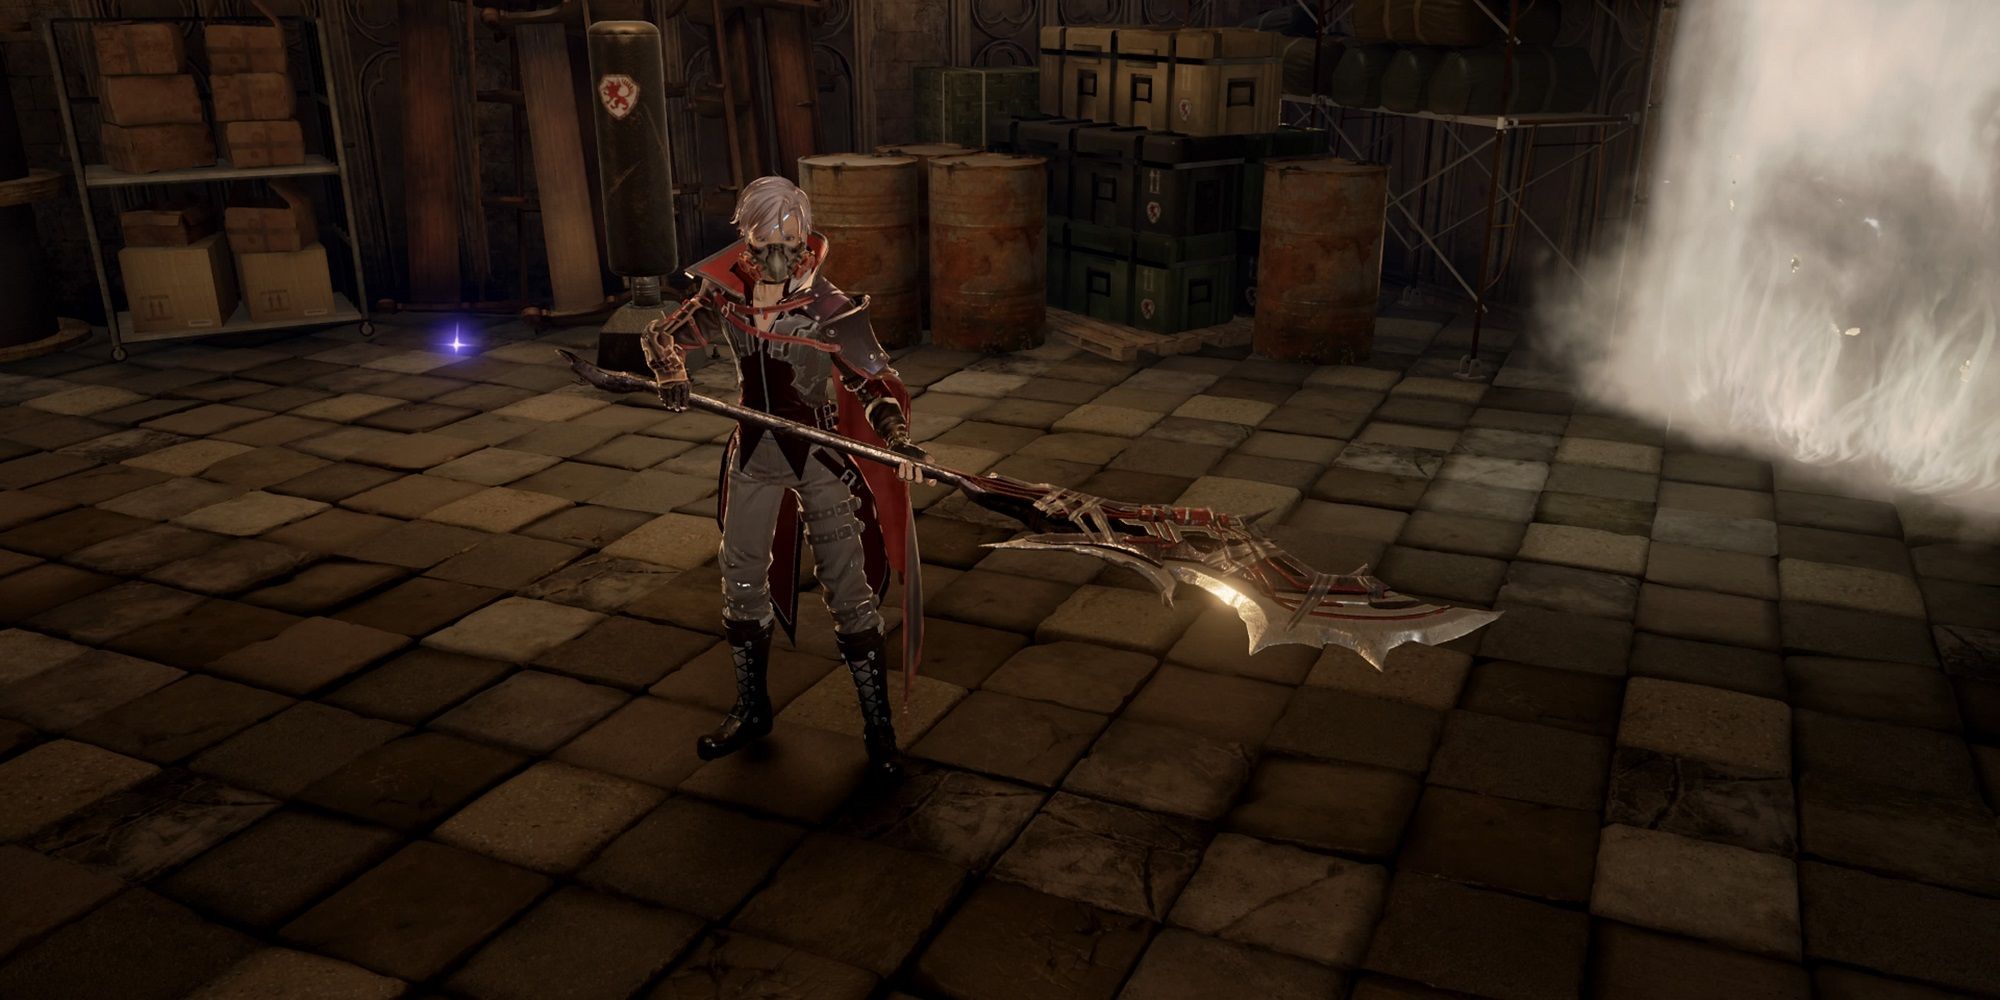 Lost Bardiche from Code Vein.